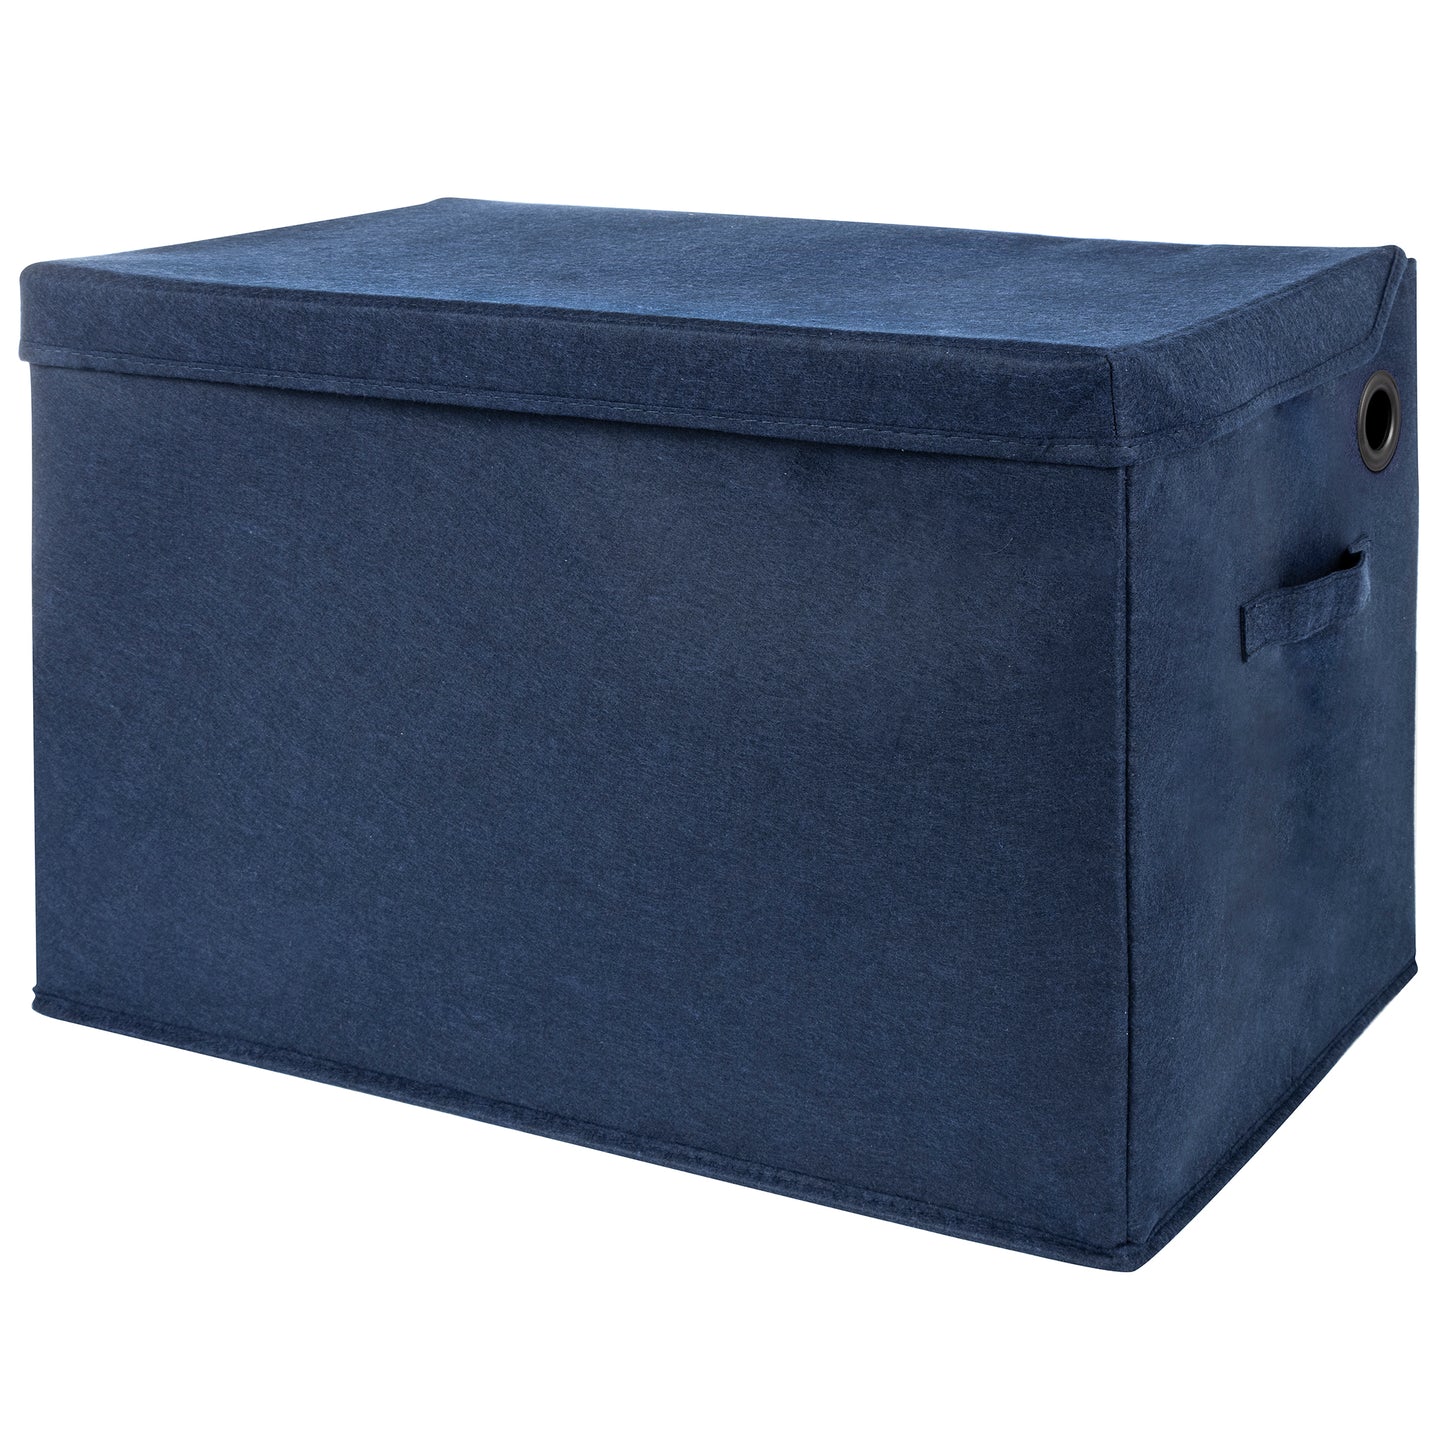 Navy Felt Toy Box by Sammy & Lou® Angled with lid closed